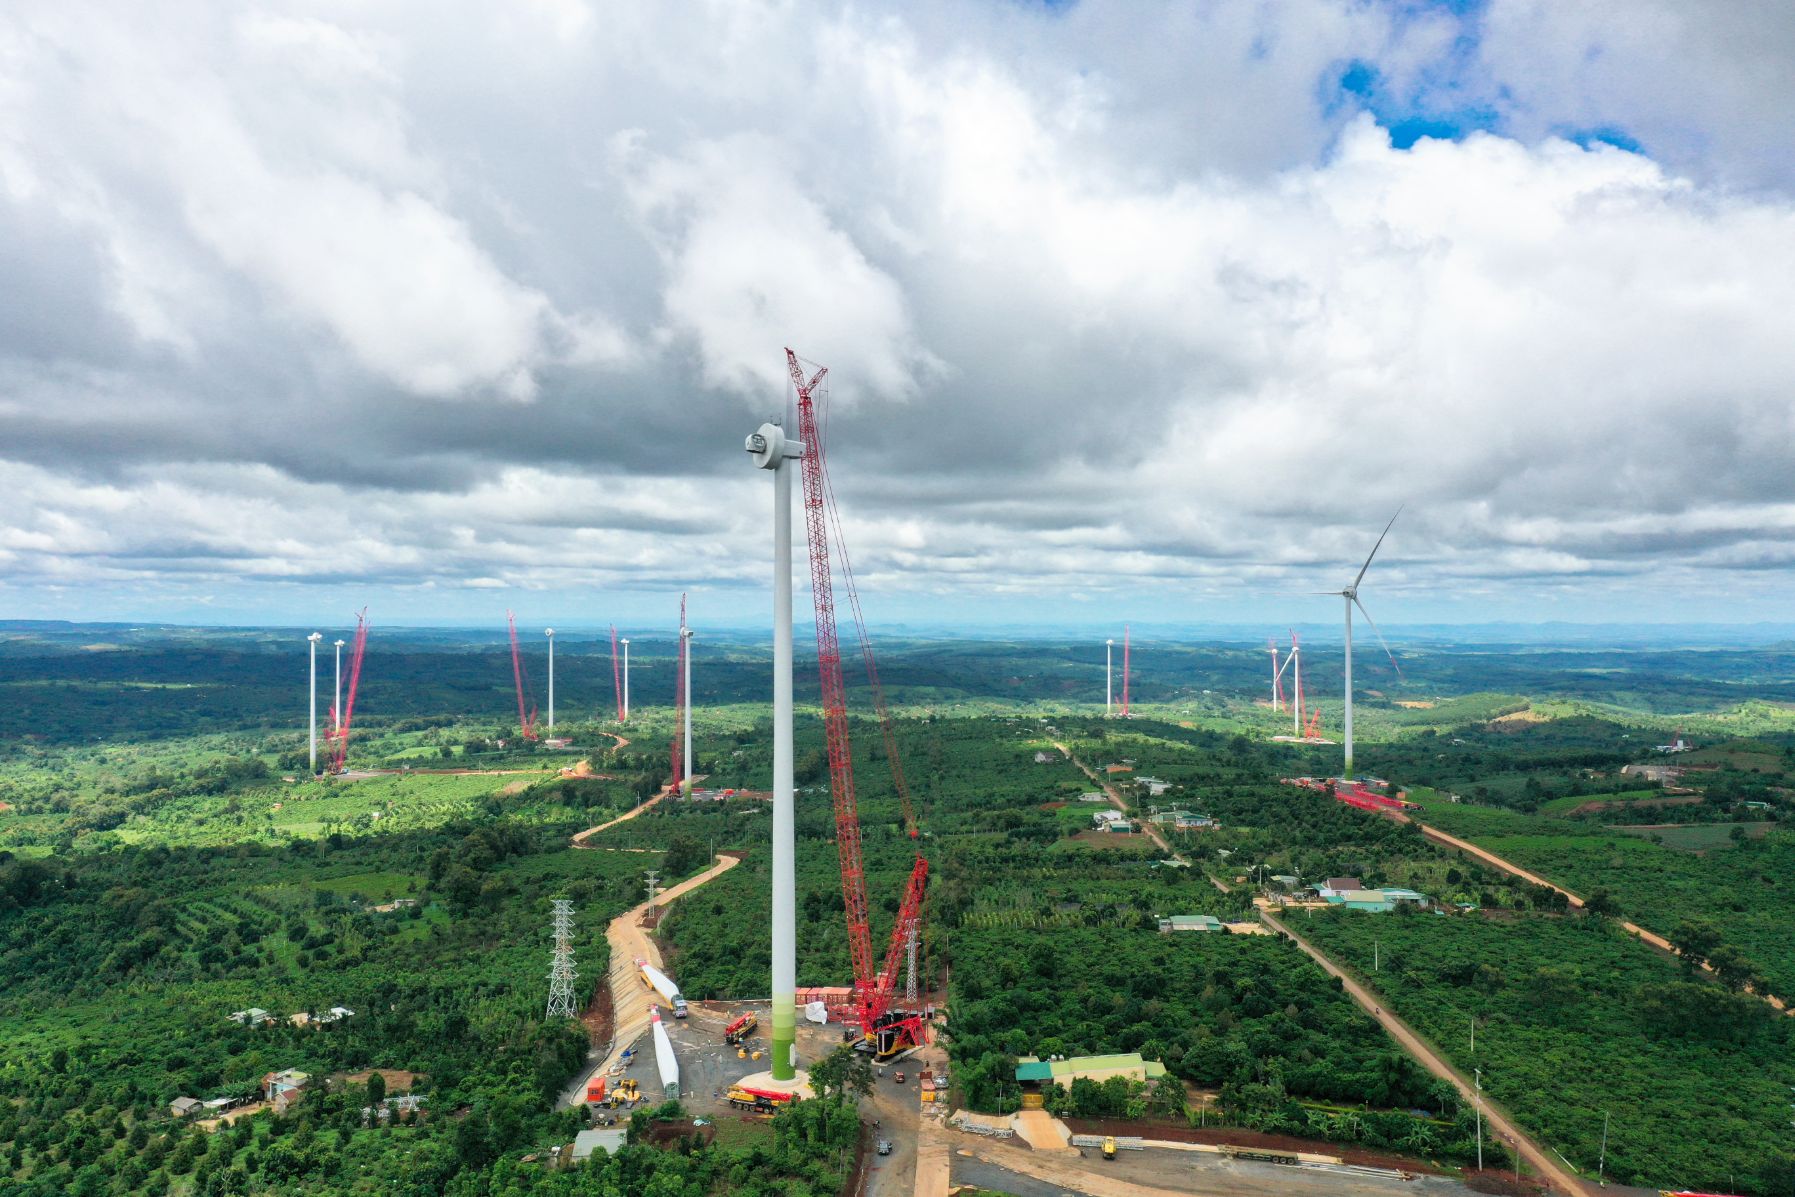 THE EA NAM WIND POWER PROJECT: FIGHT AGAINST COVID-19